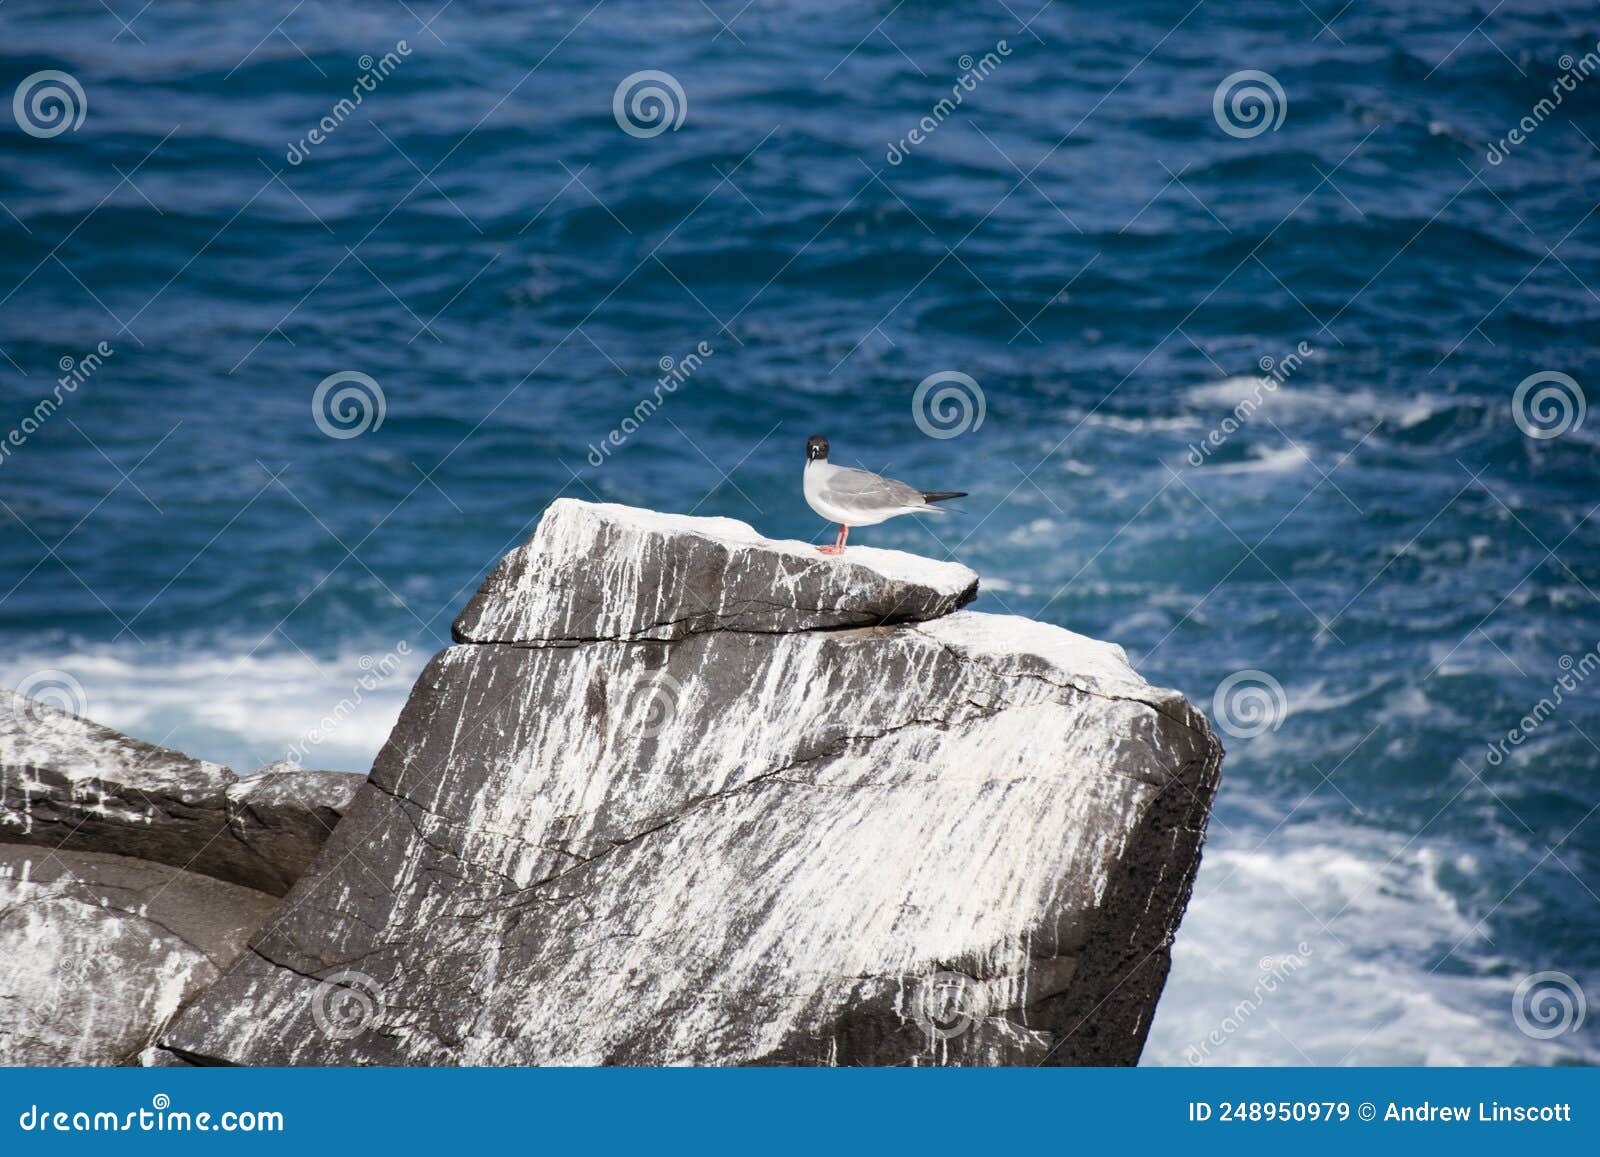 swallow tailed gull creagus furcatus, perched on a rock on espan